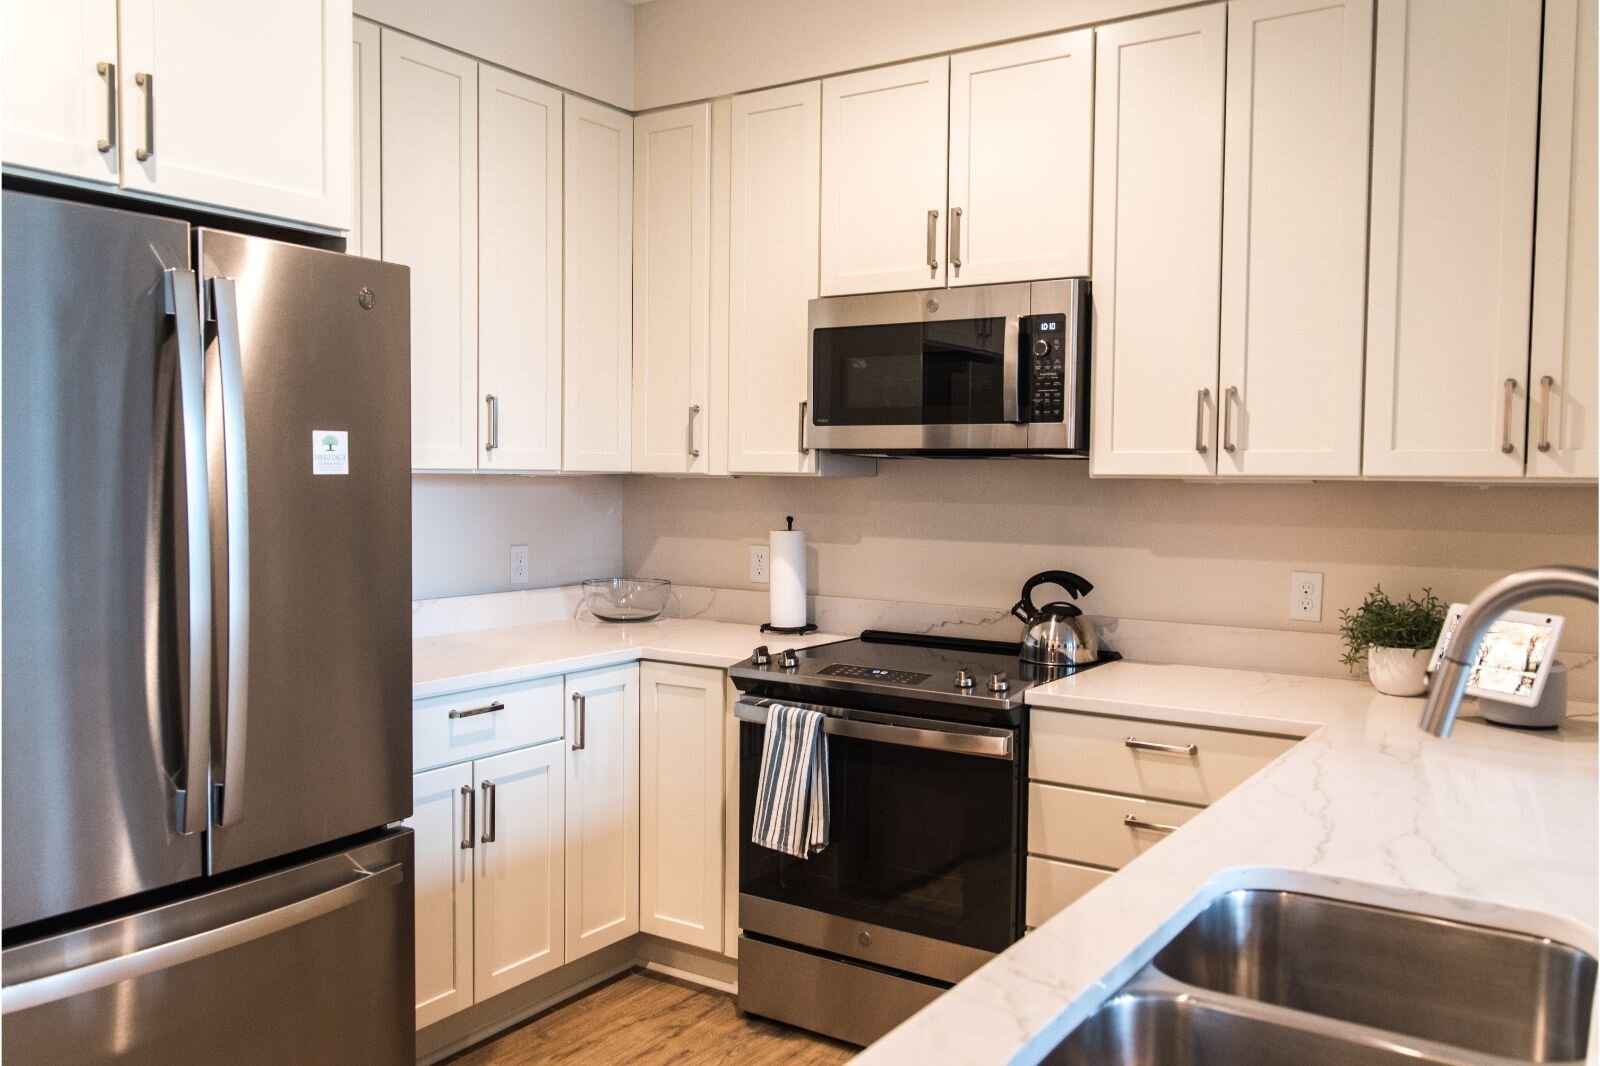 Shown here is the kitchen area of a one-bedroom apartment in the 60-unit independent living community.